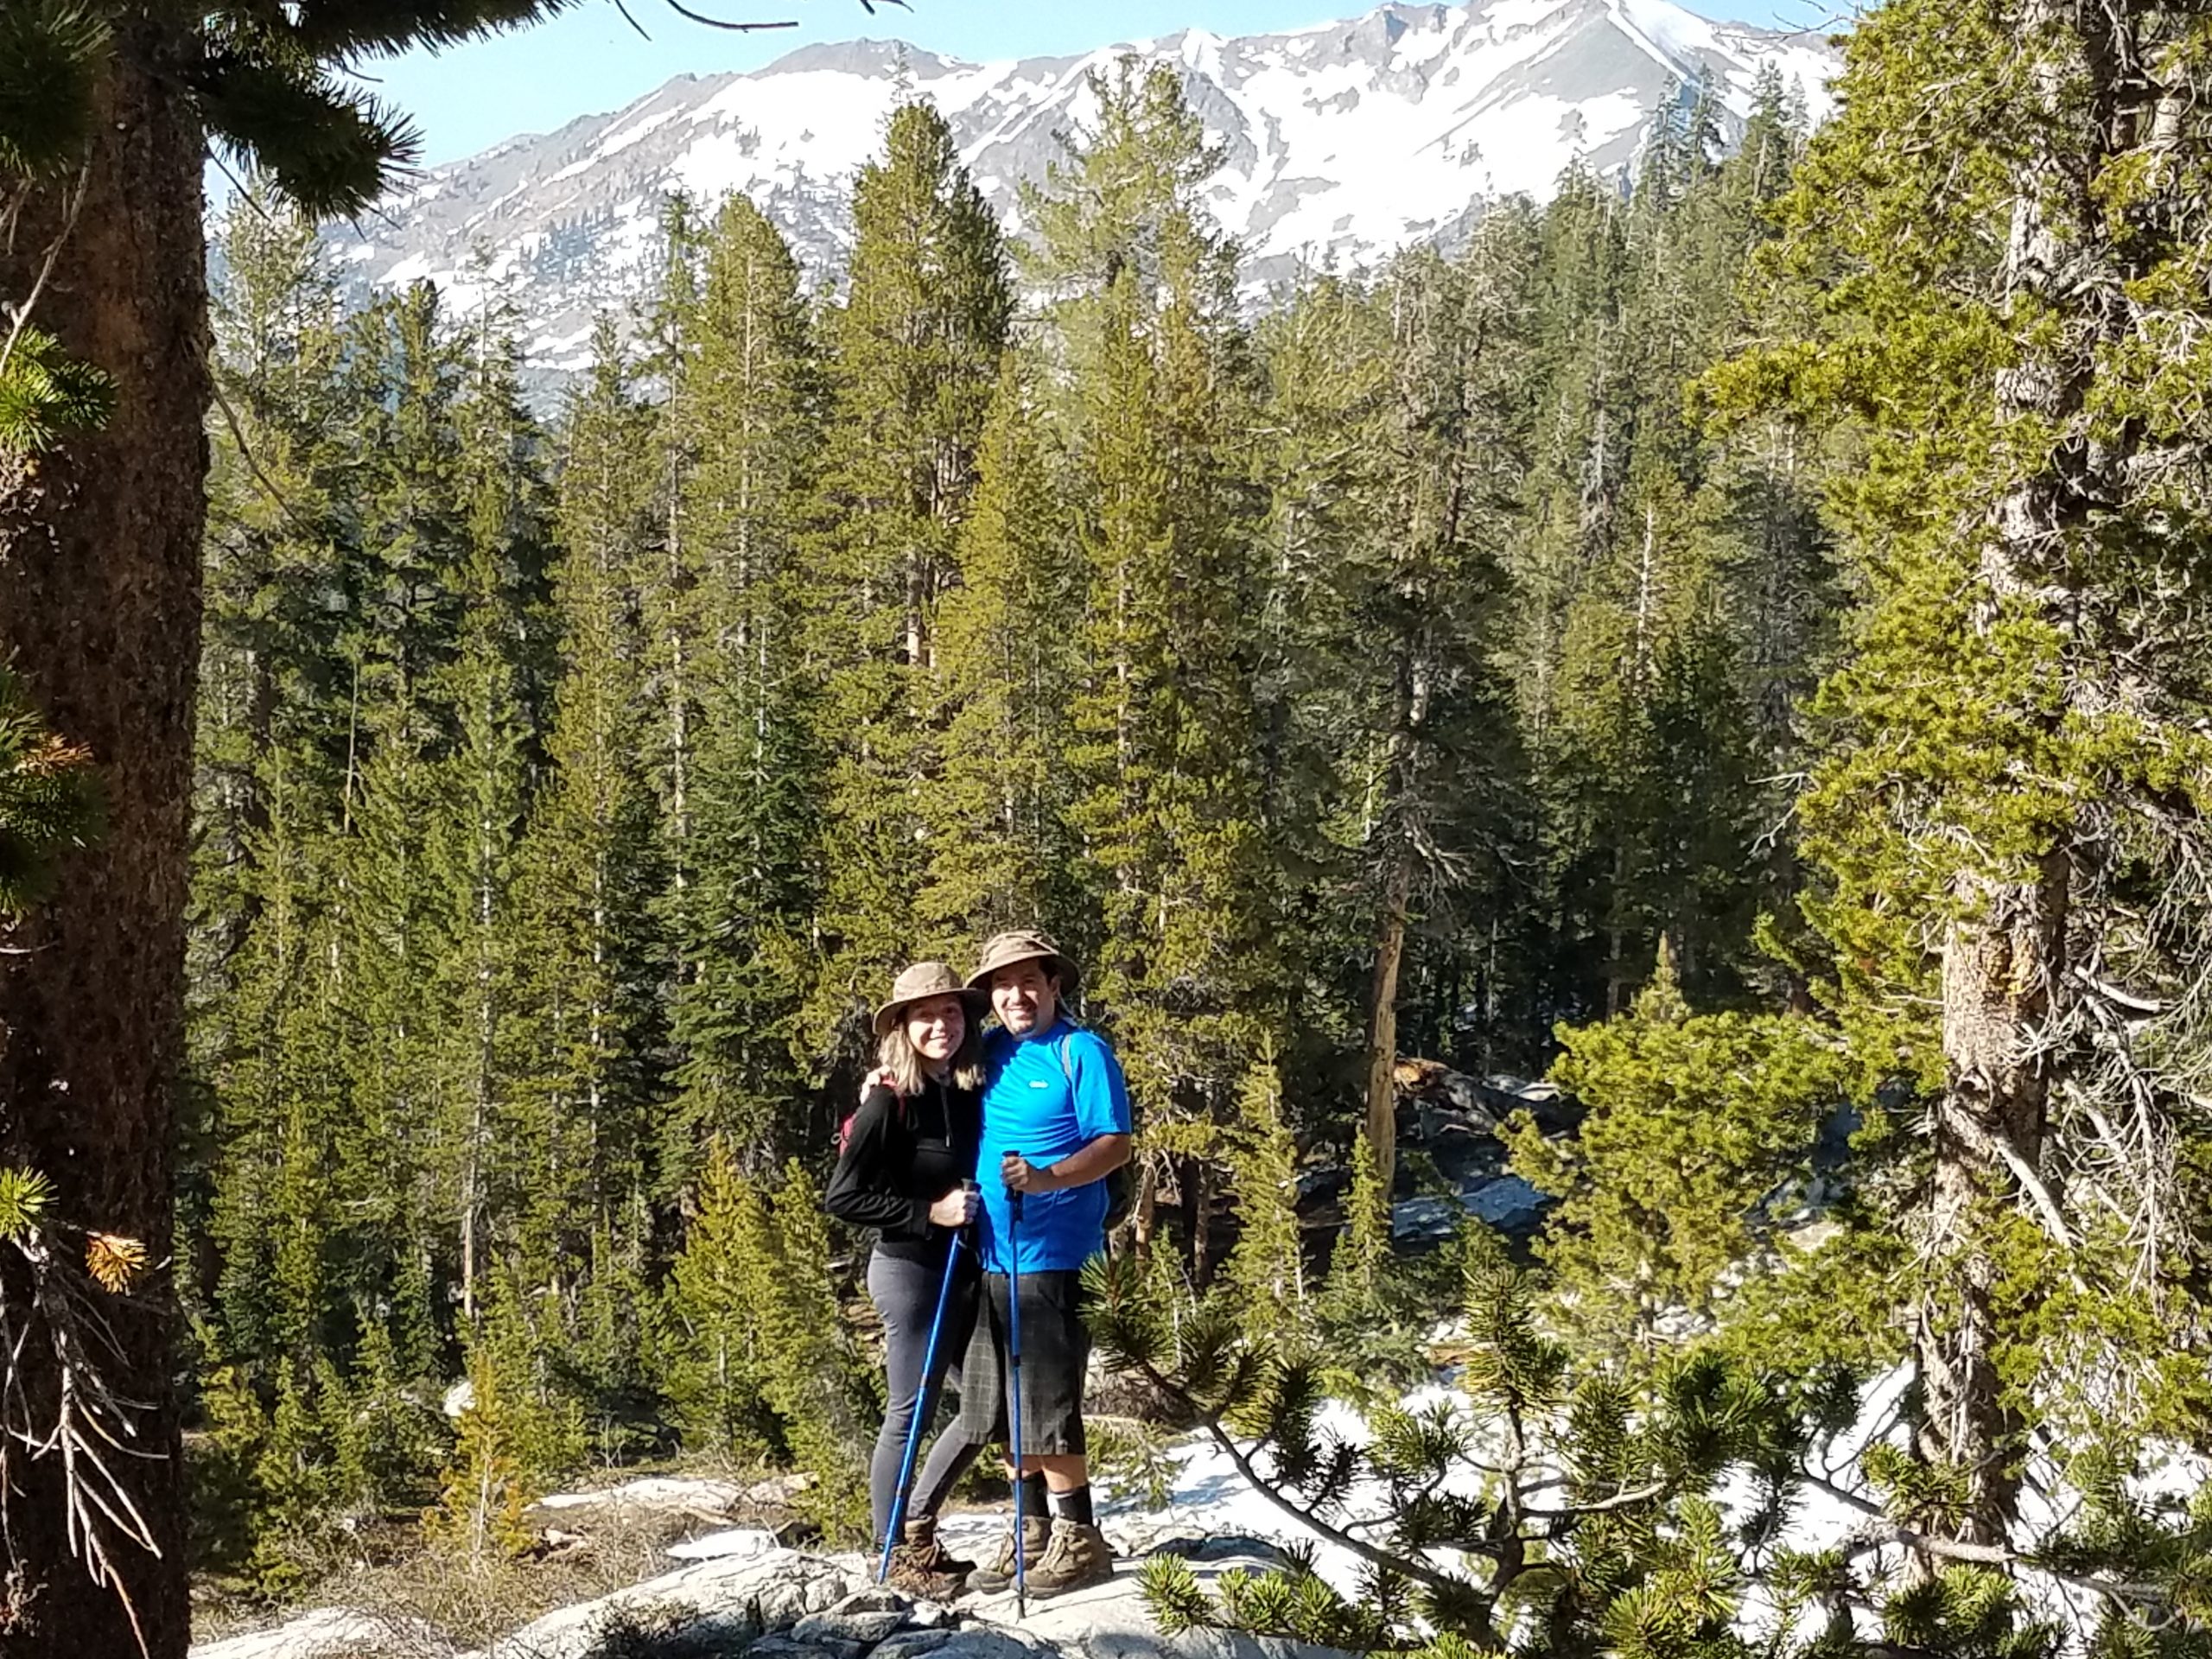 Judy Andrade, Business Development Specialist at Kebony, posing on a snowy wooded hiking trail with her fiancé during a sunny day